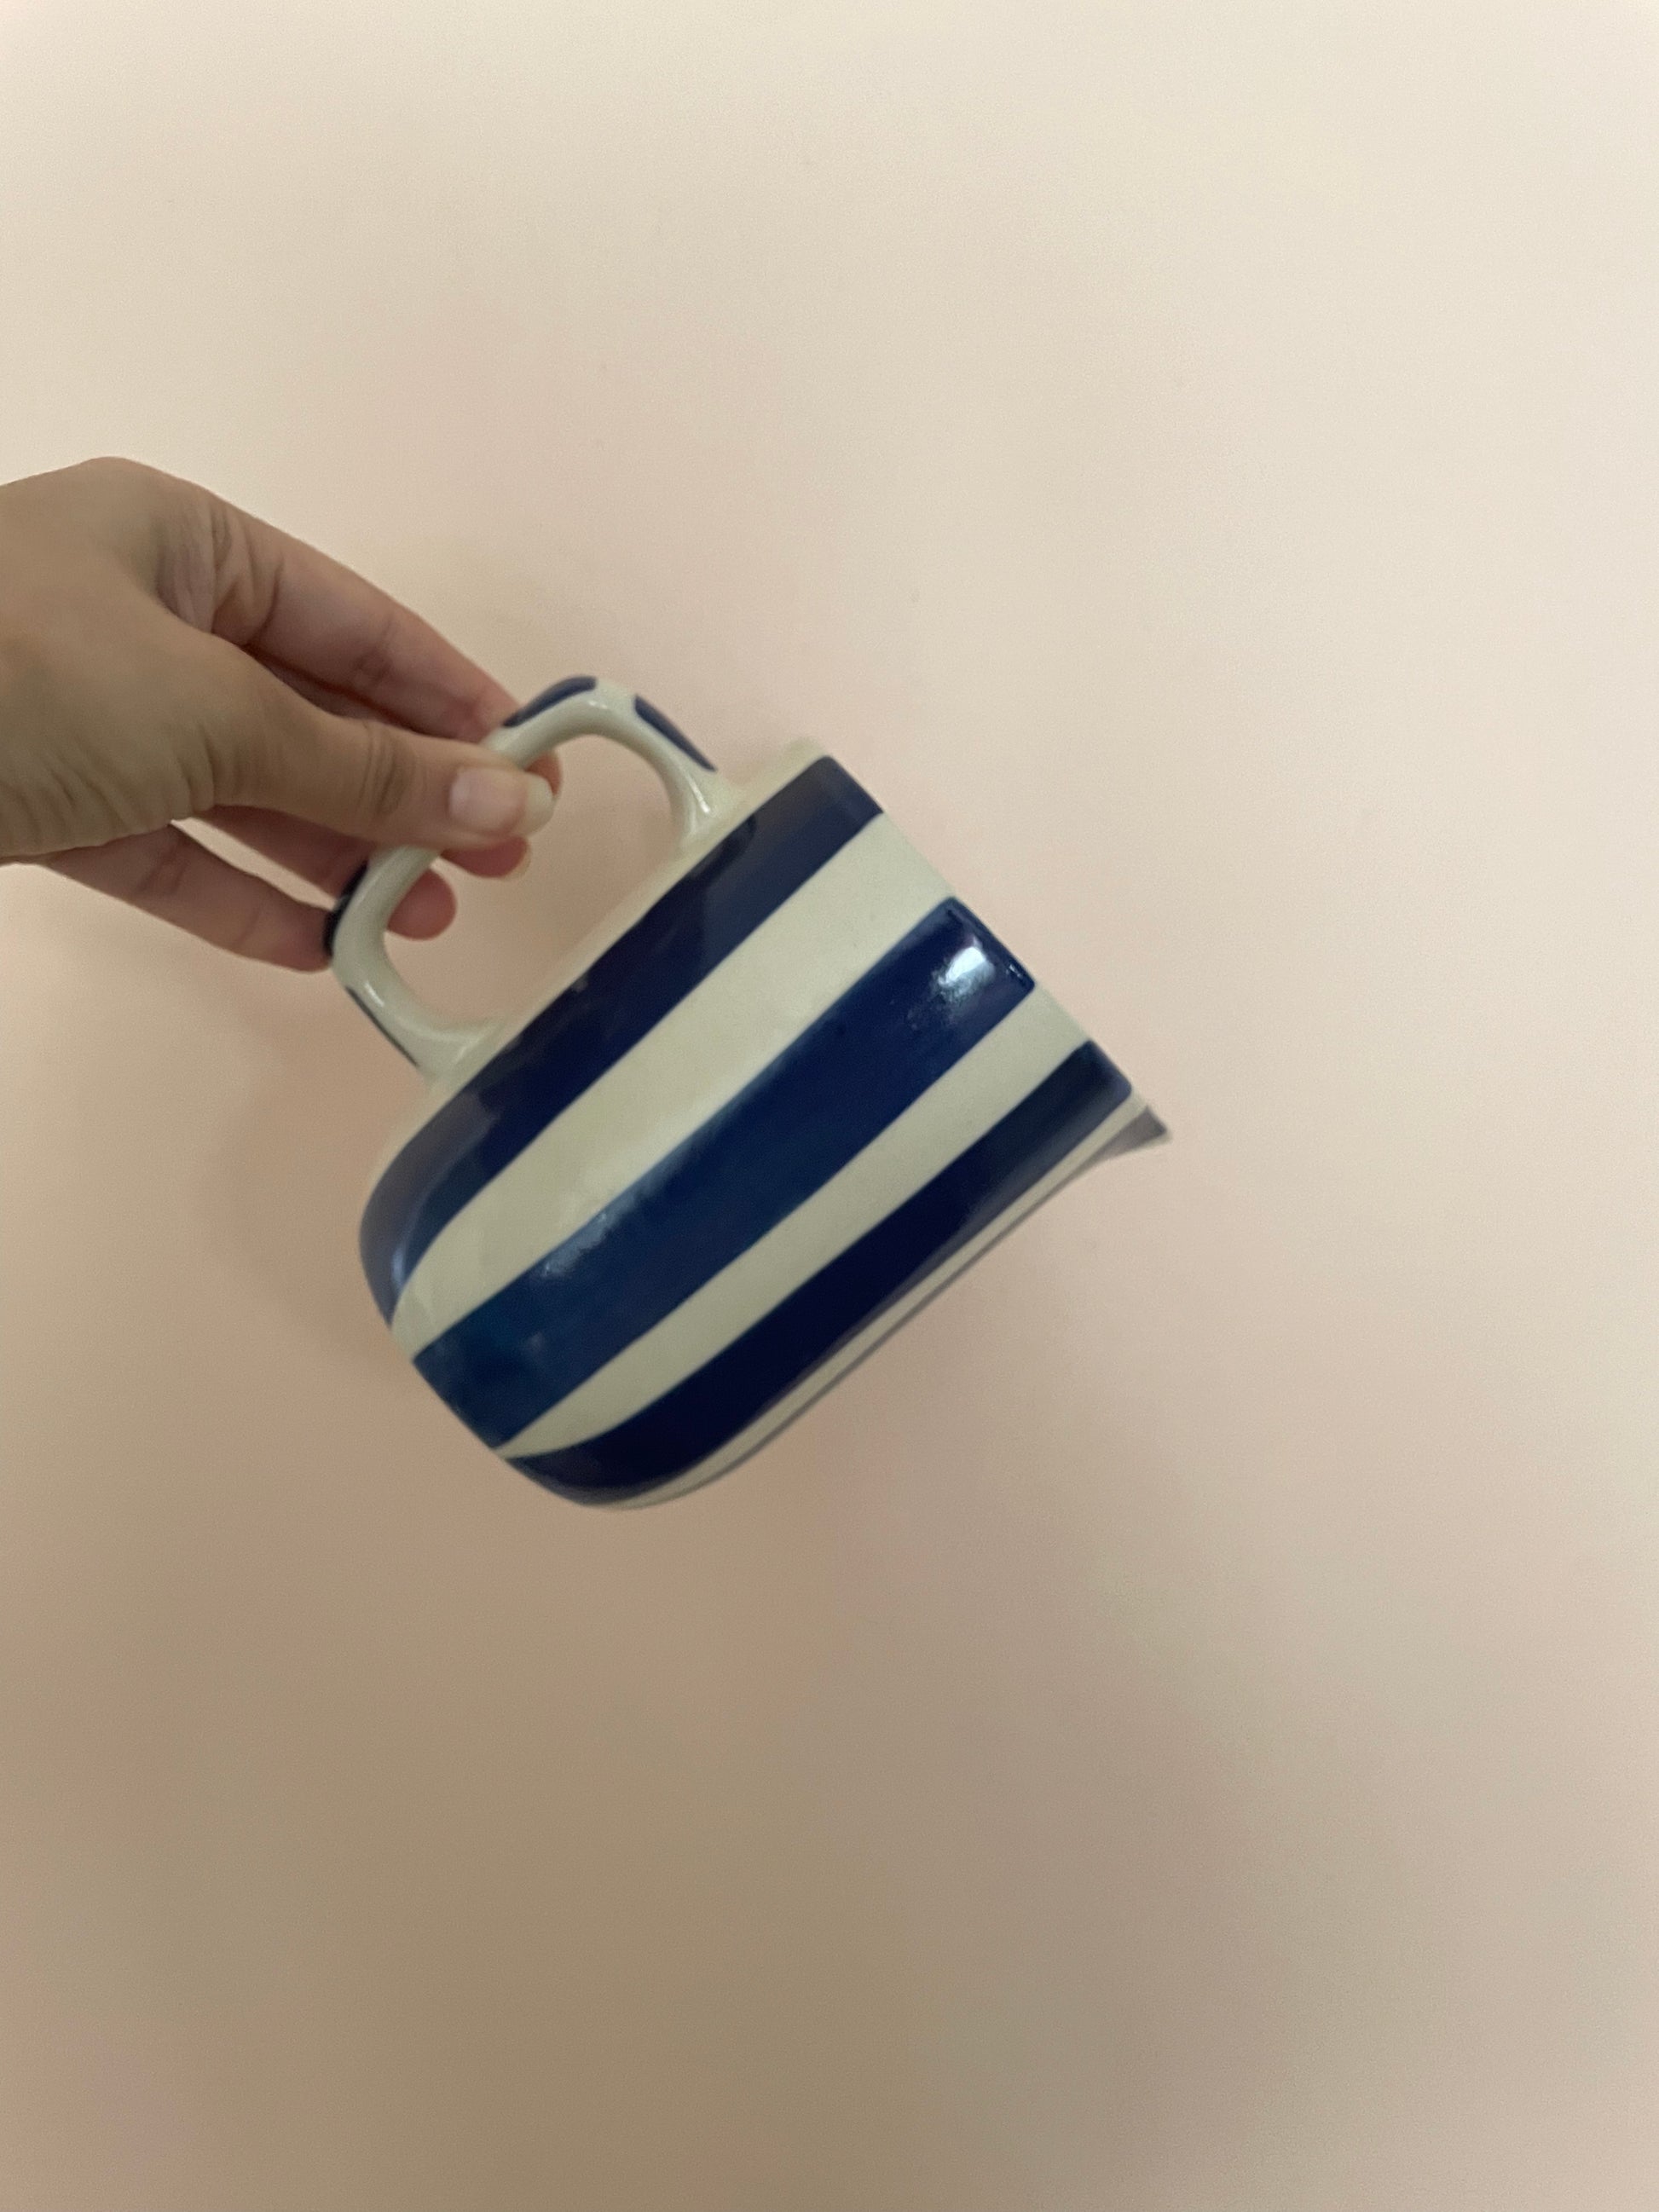 Hand holding small off-white ceramic jug with square-ish handle, blue hand-painted broad stripes against pink wall. Explore luxury ceramics Bangalore.